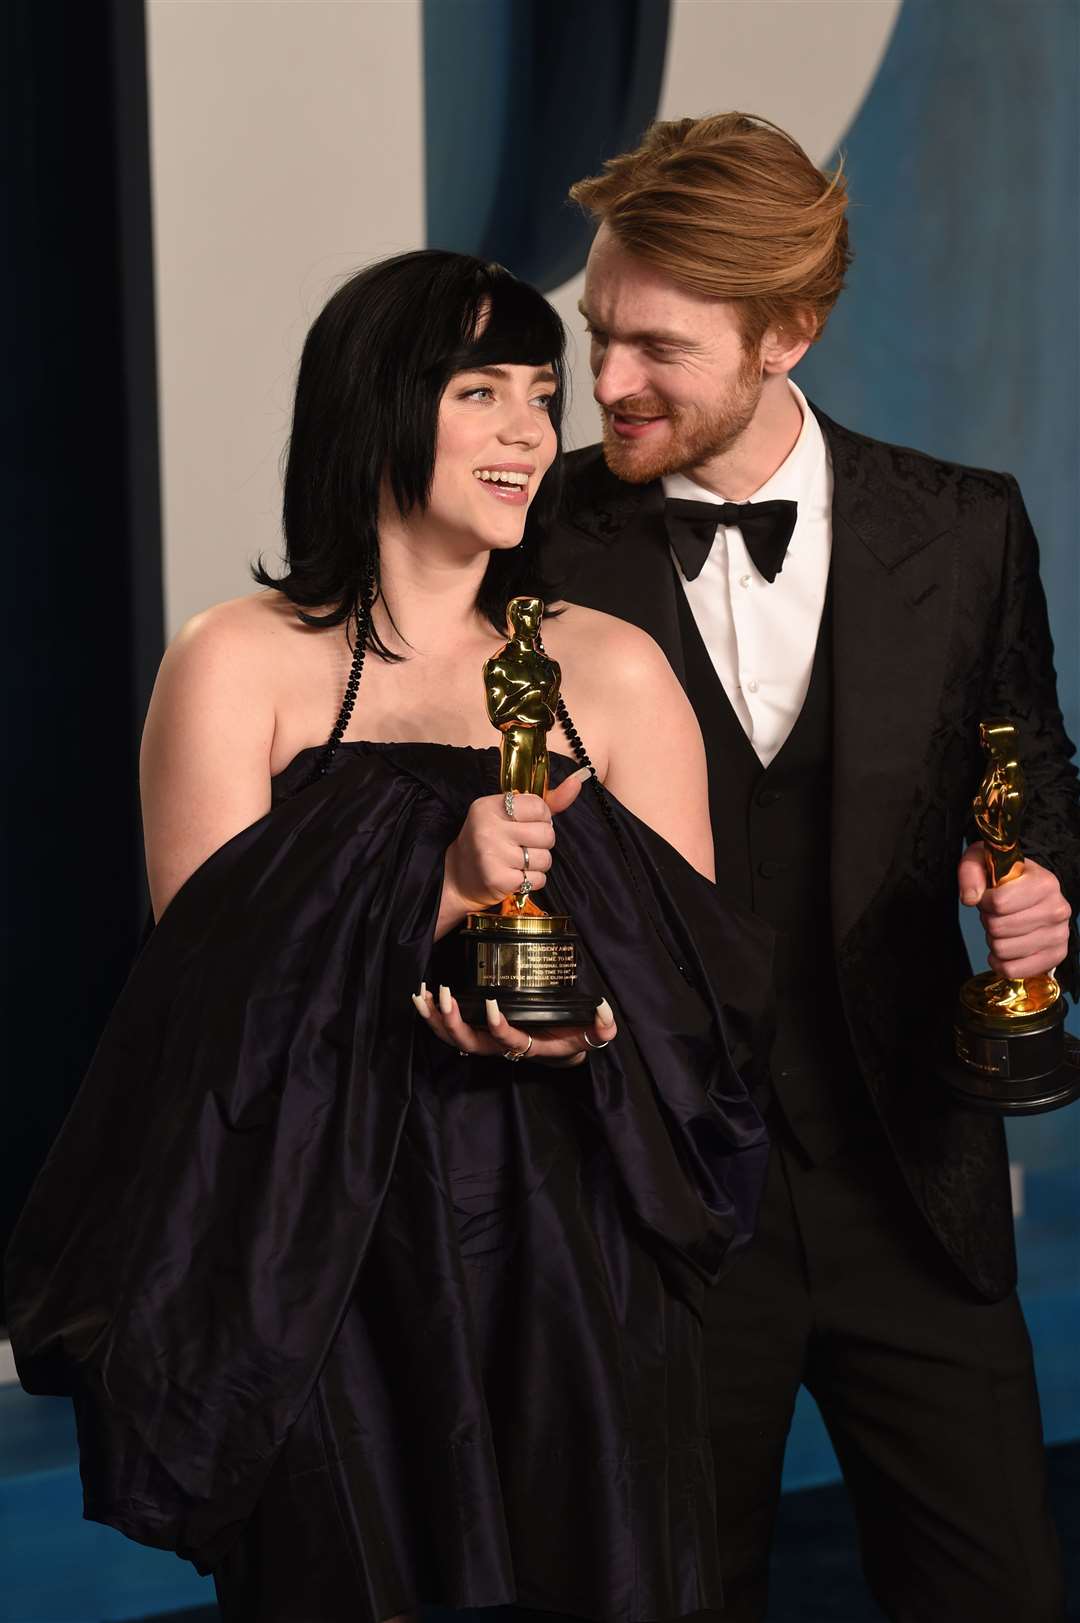 Billie Eilish and Finneas O’Connell with their Academy Awards in 2022 (Doug Peters/PA)